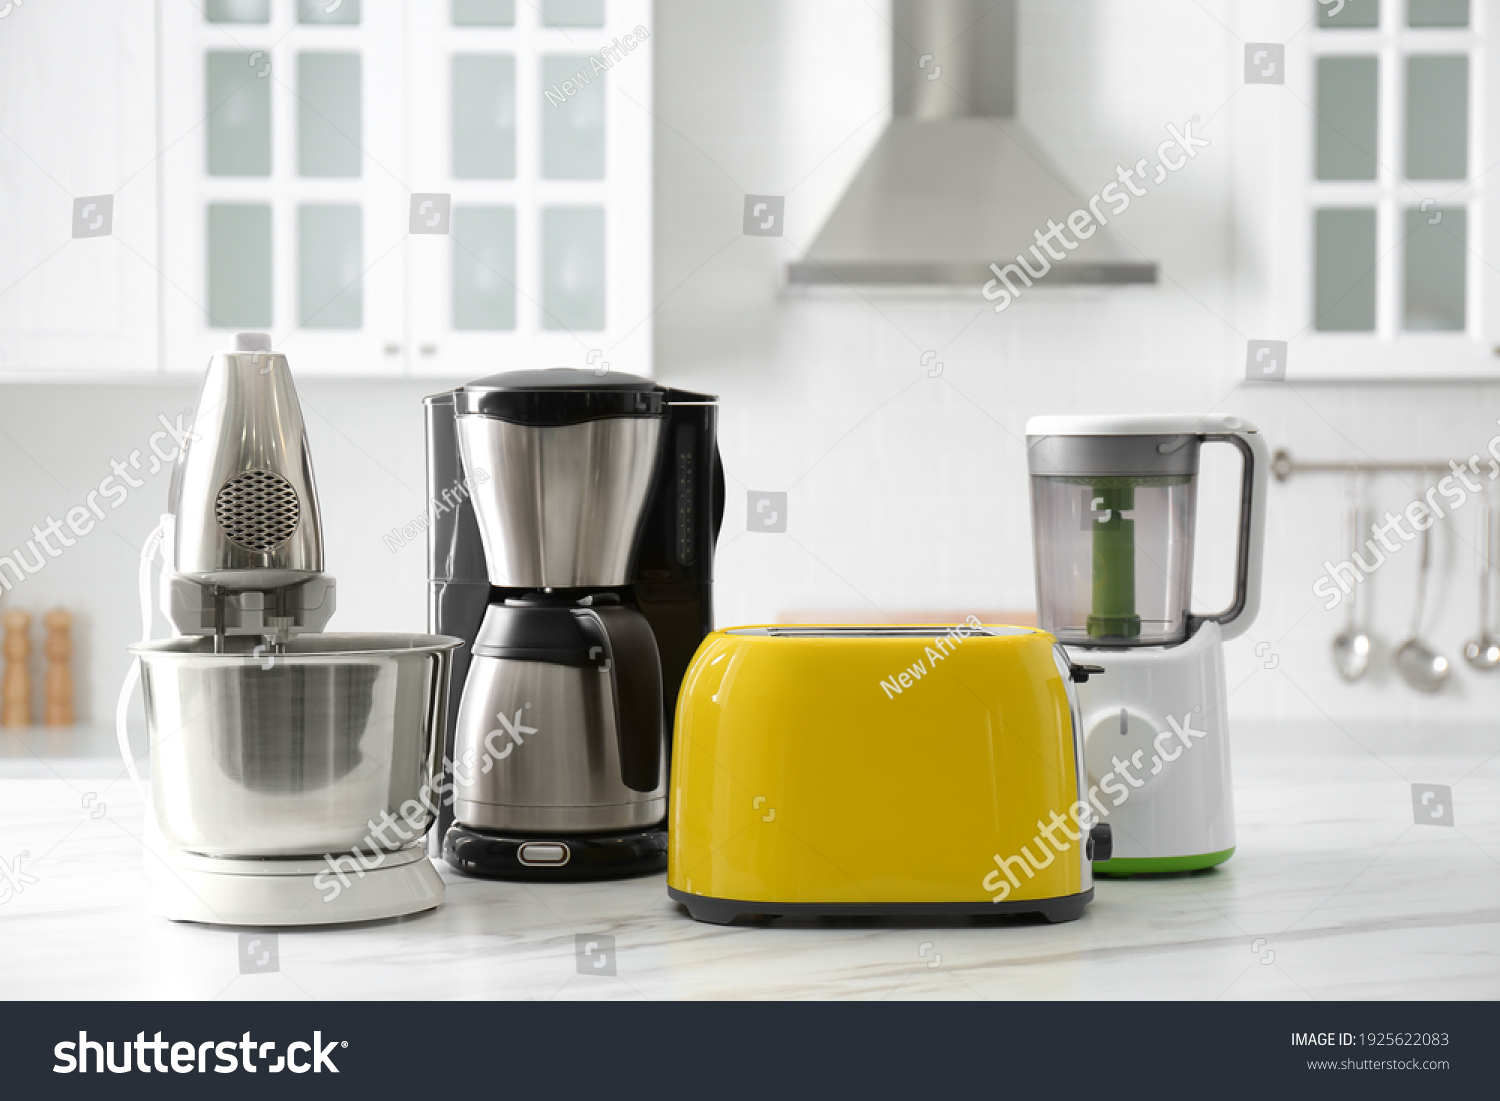 Stock Photo Modern Toaster And Other Home Appliances On White Marble Table In Kitchen 1925622083 